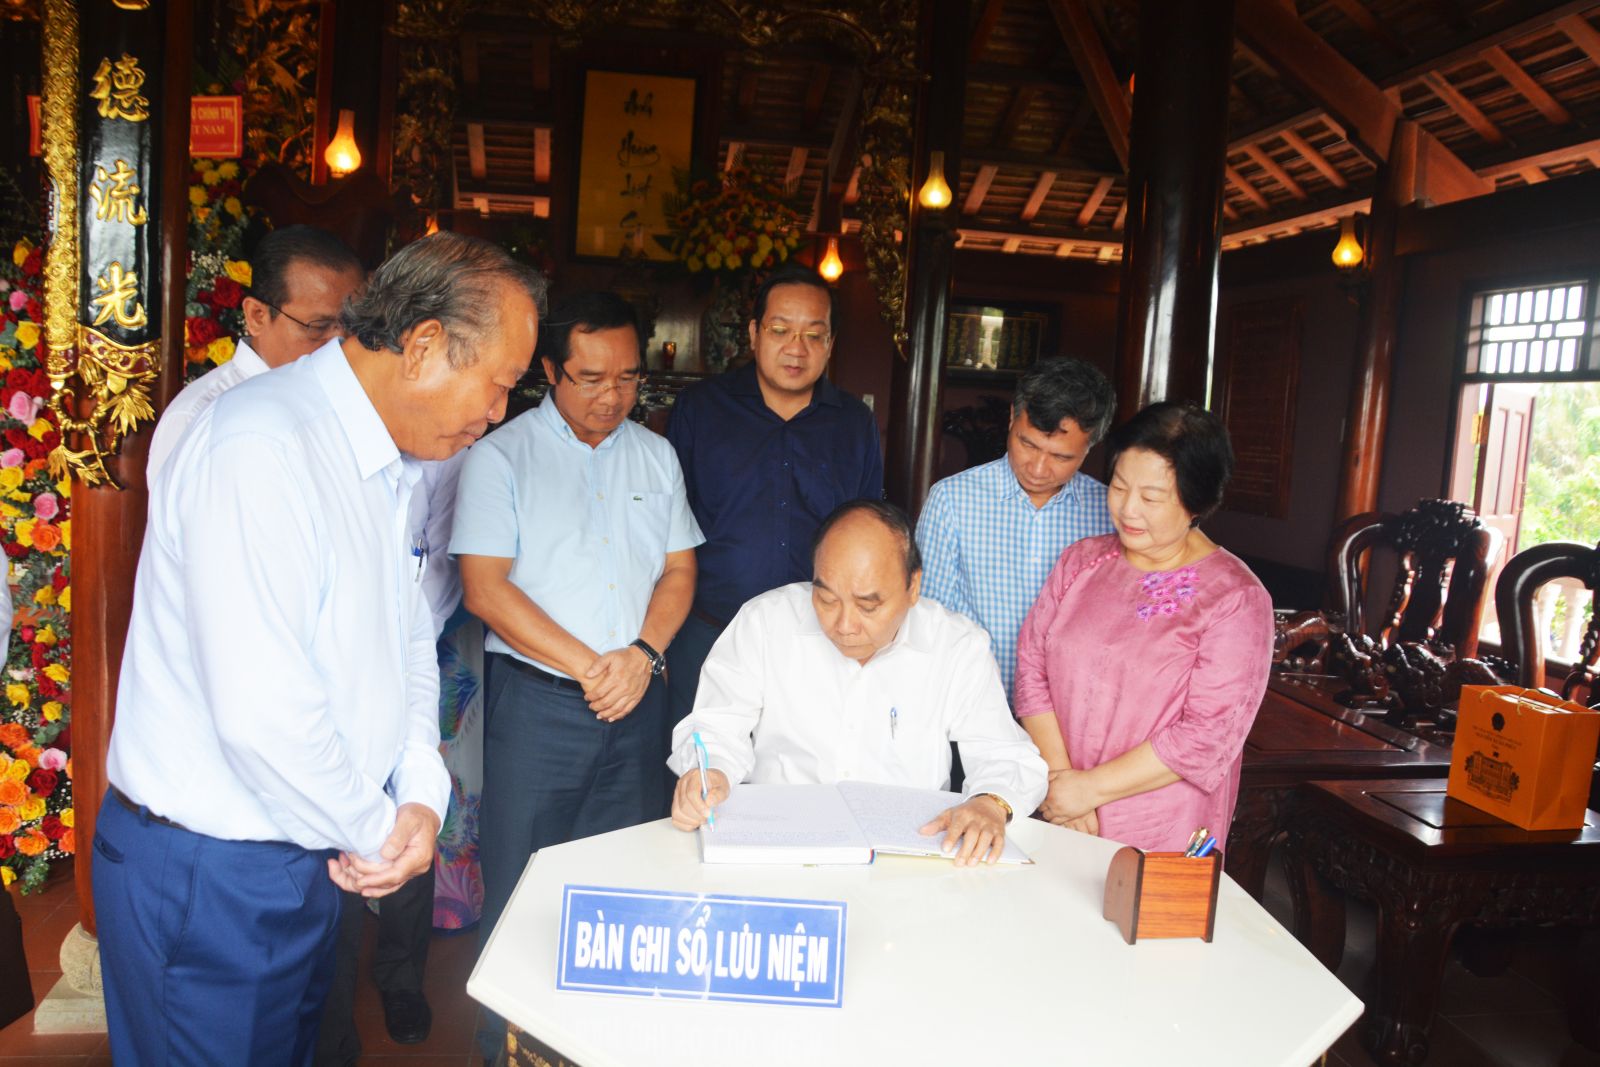 President Nguyen Xuan Phuc expresses his opinions in the scrapbook